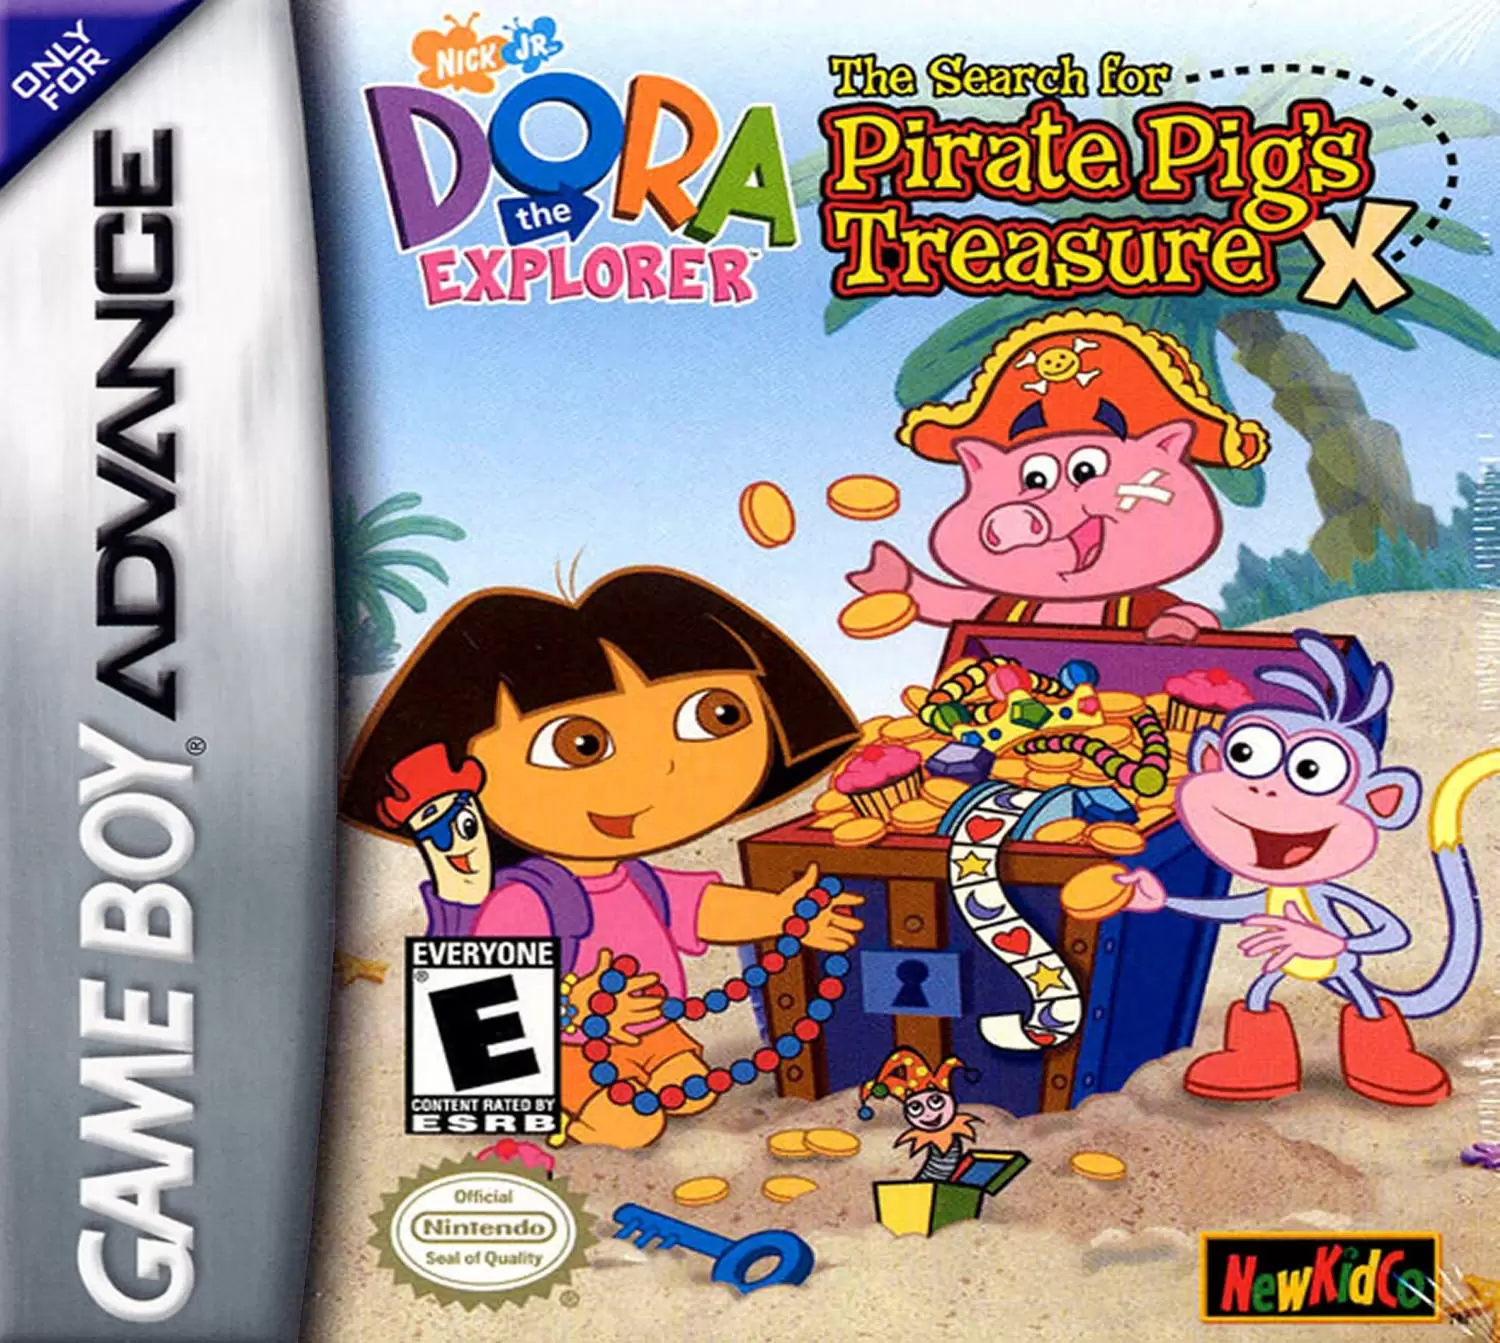 Game Boy Advance Games - Dora the Explorer: The Search for Pirate Pig\'s Treasure